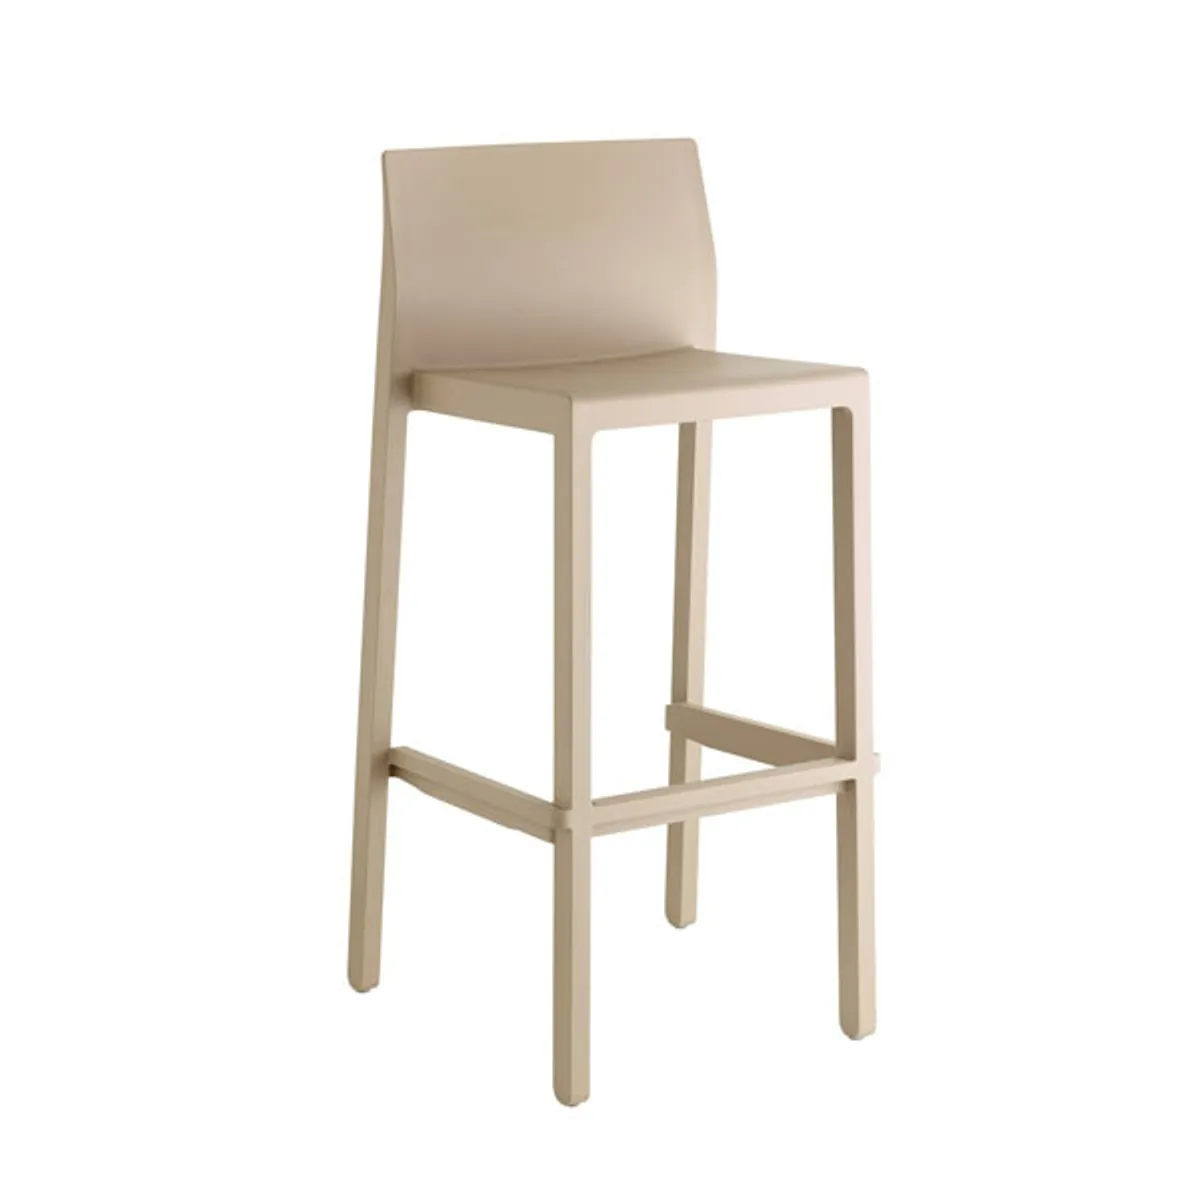 Remi bar stool bar height 4 Inside Out Contracts